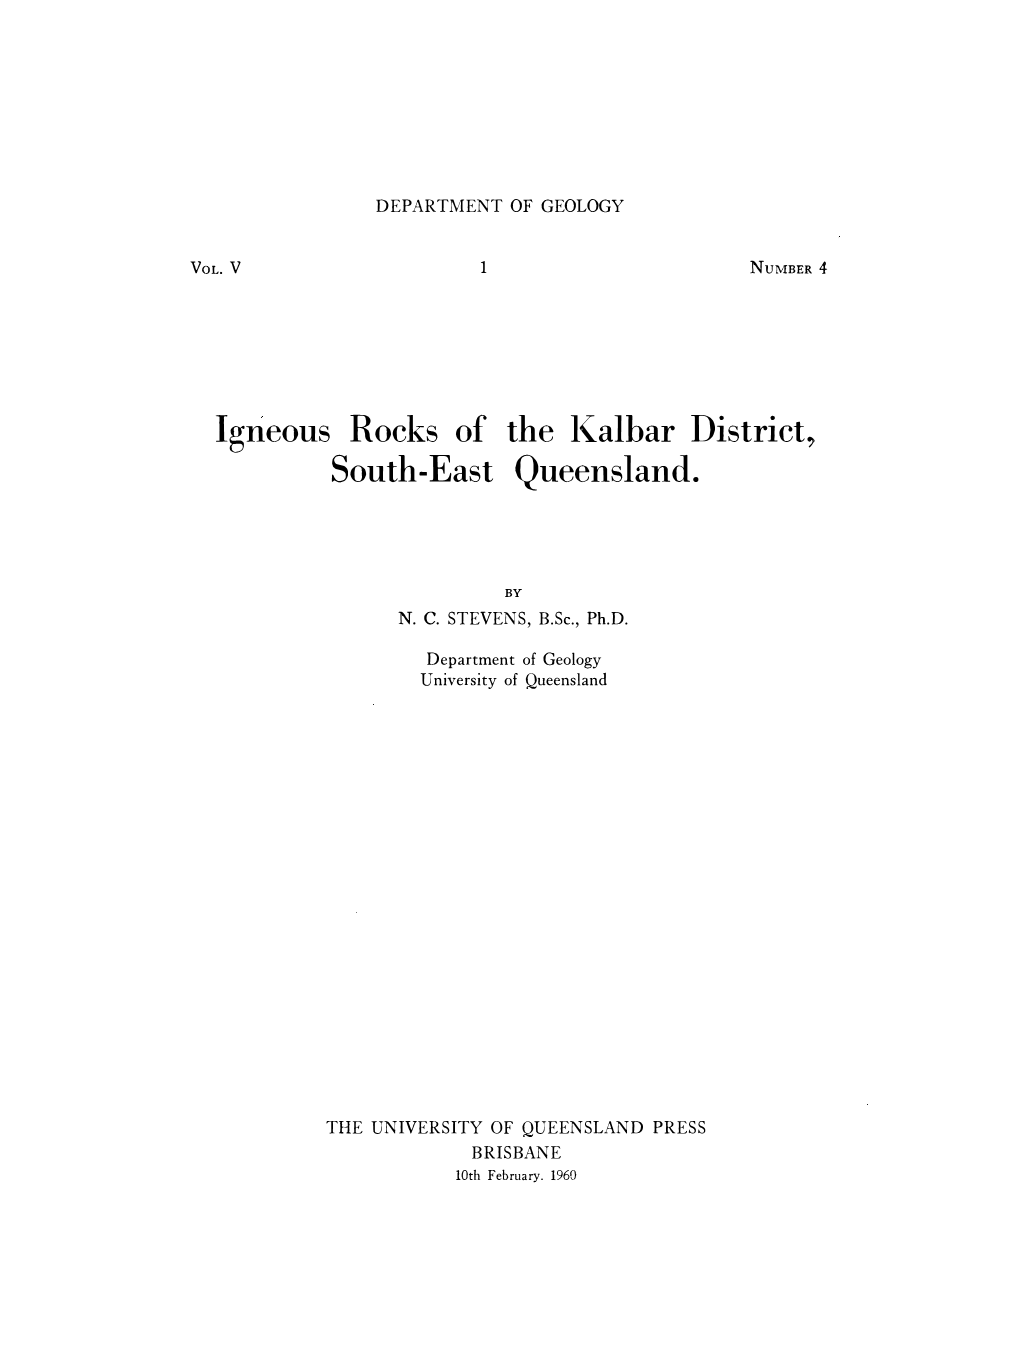 Igneous Rocks of the L(Albar District, South-East Queensland